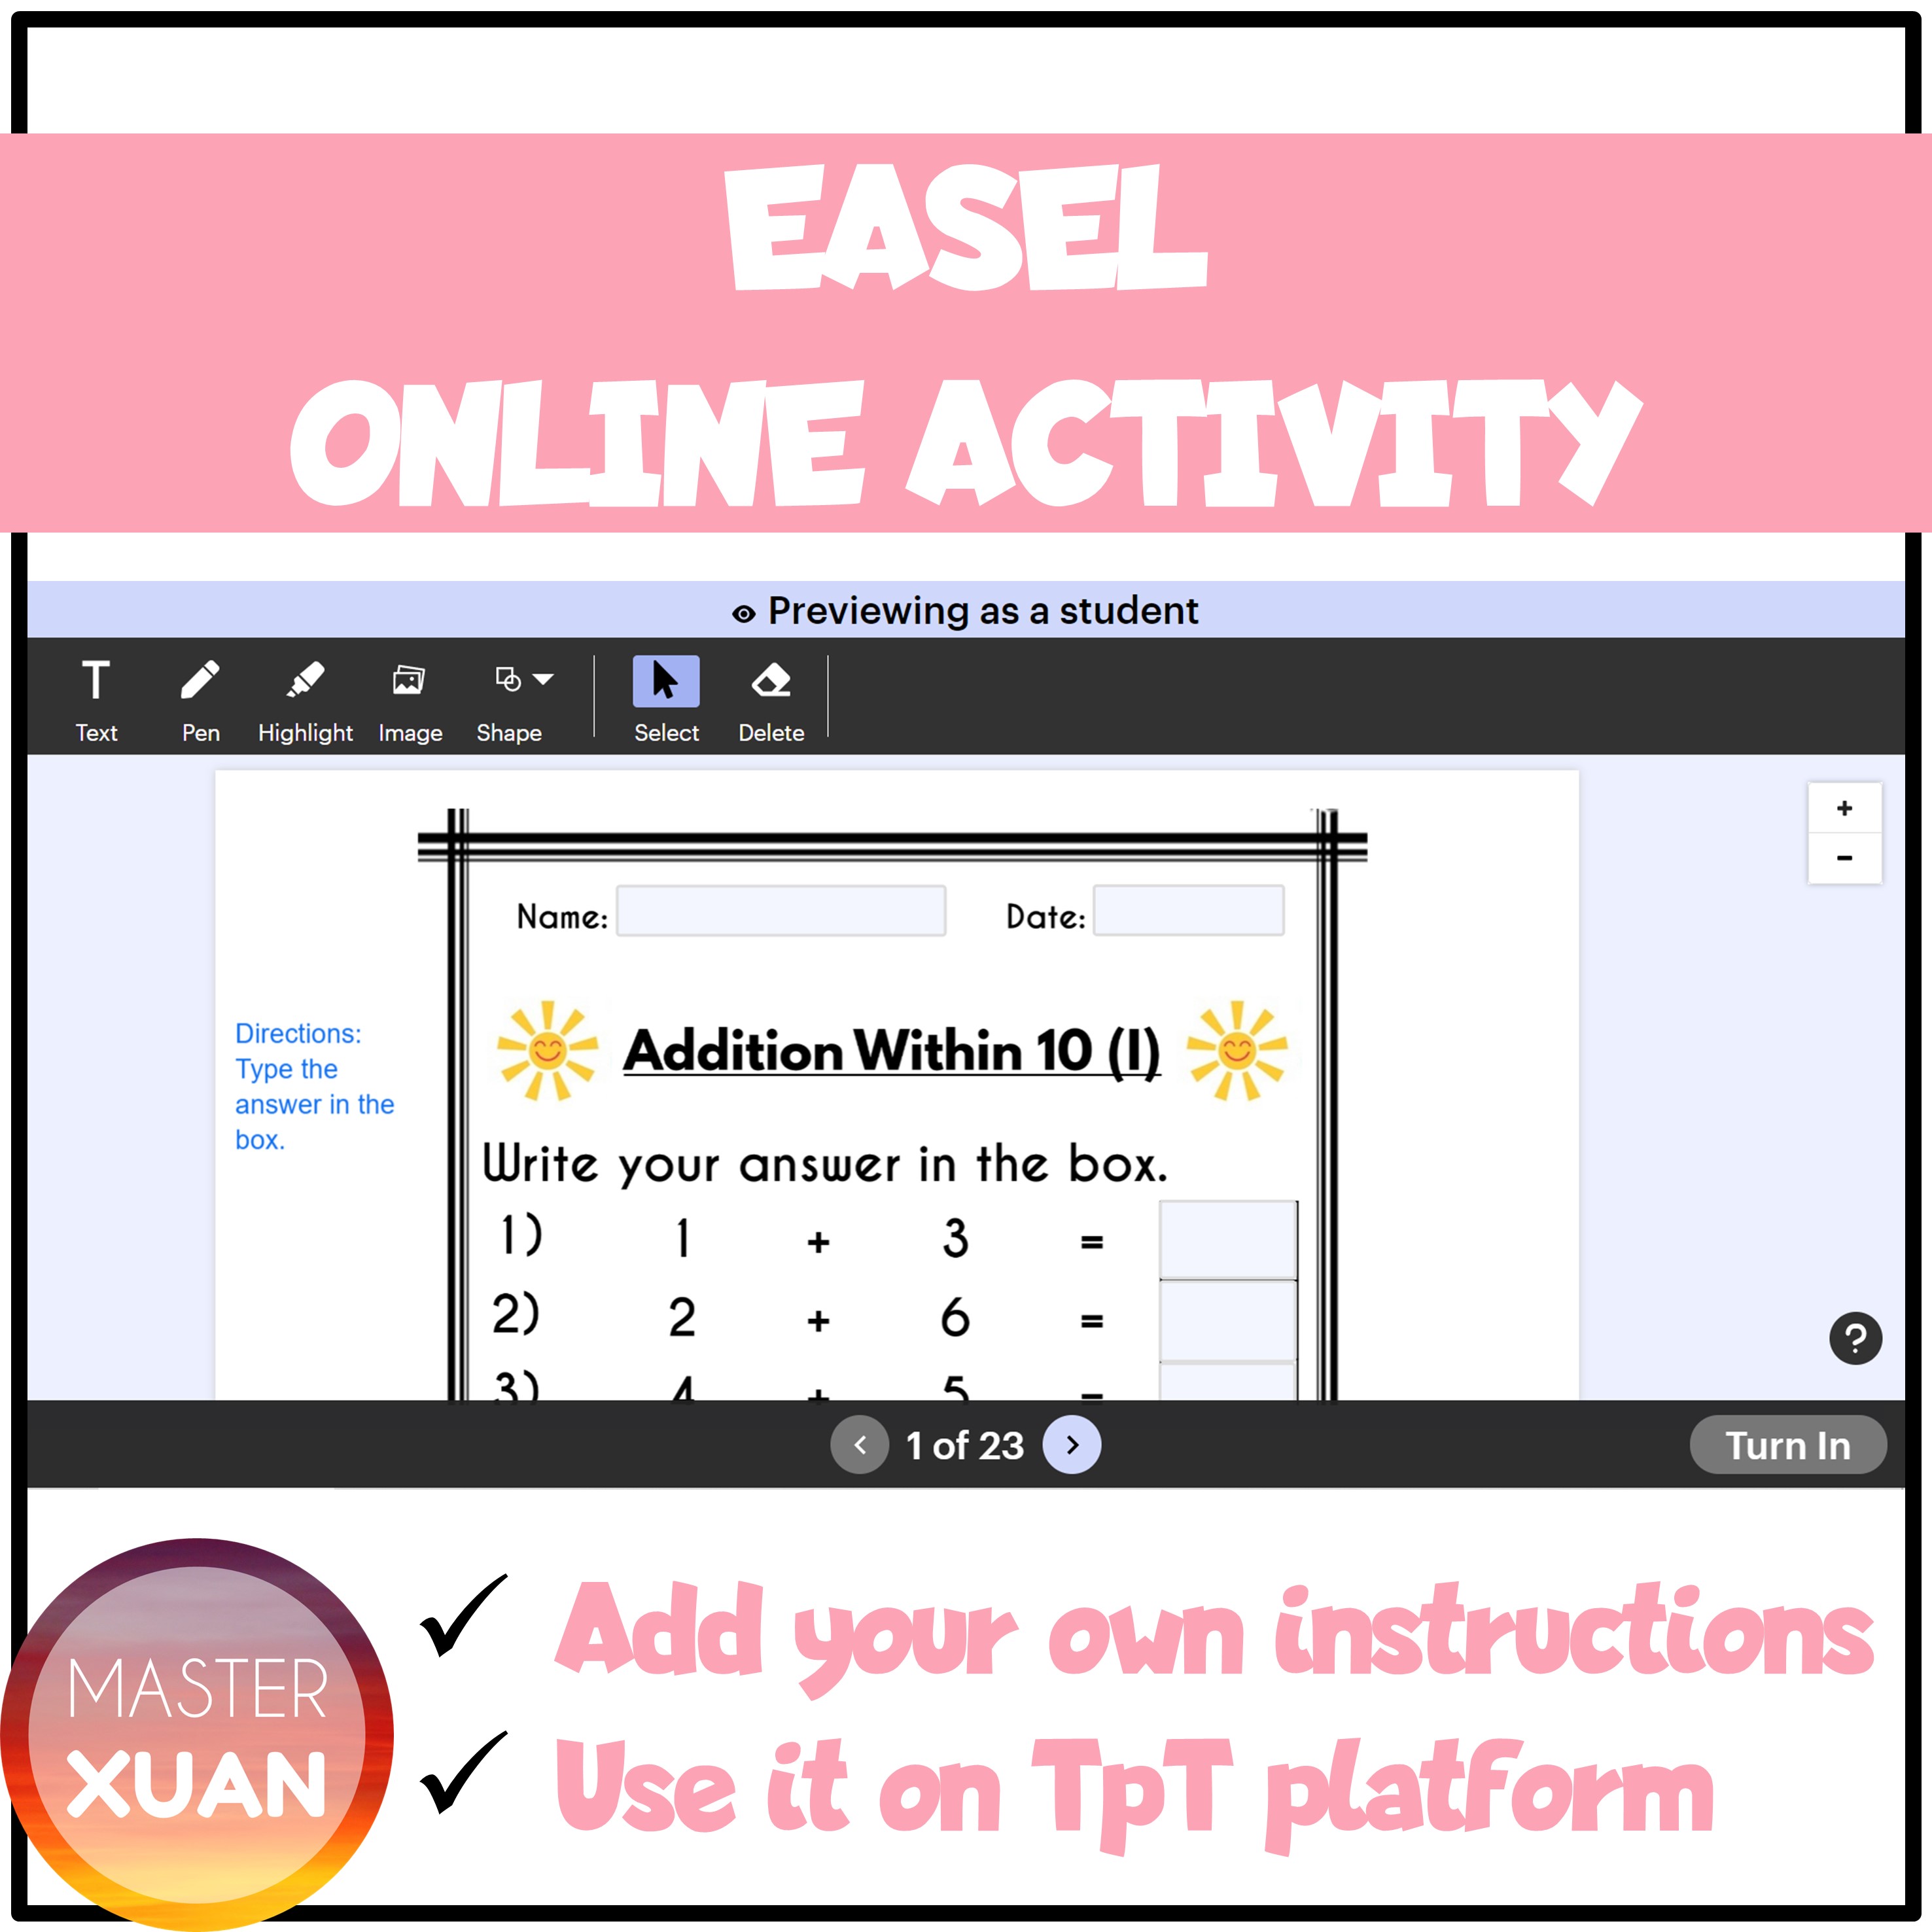 addition and subtraction math drills in Easel as online activity